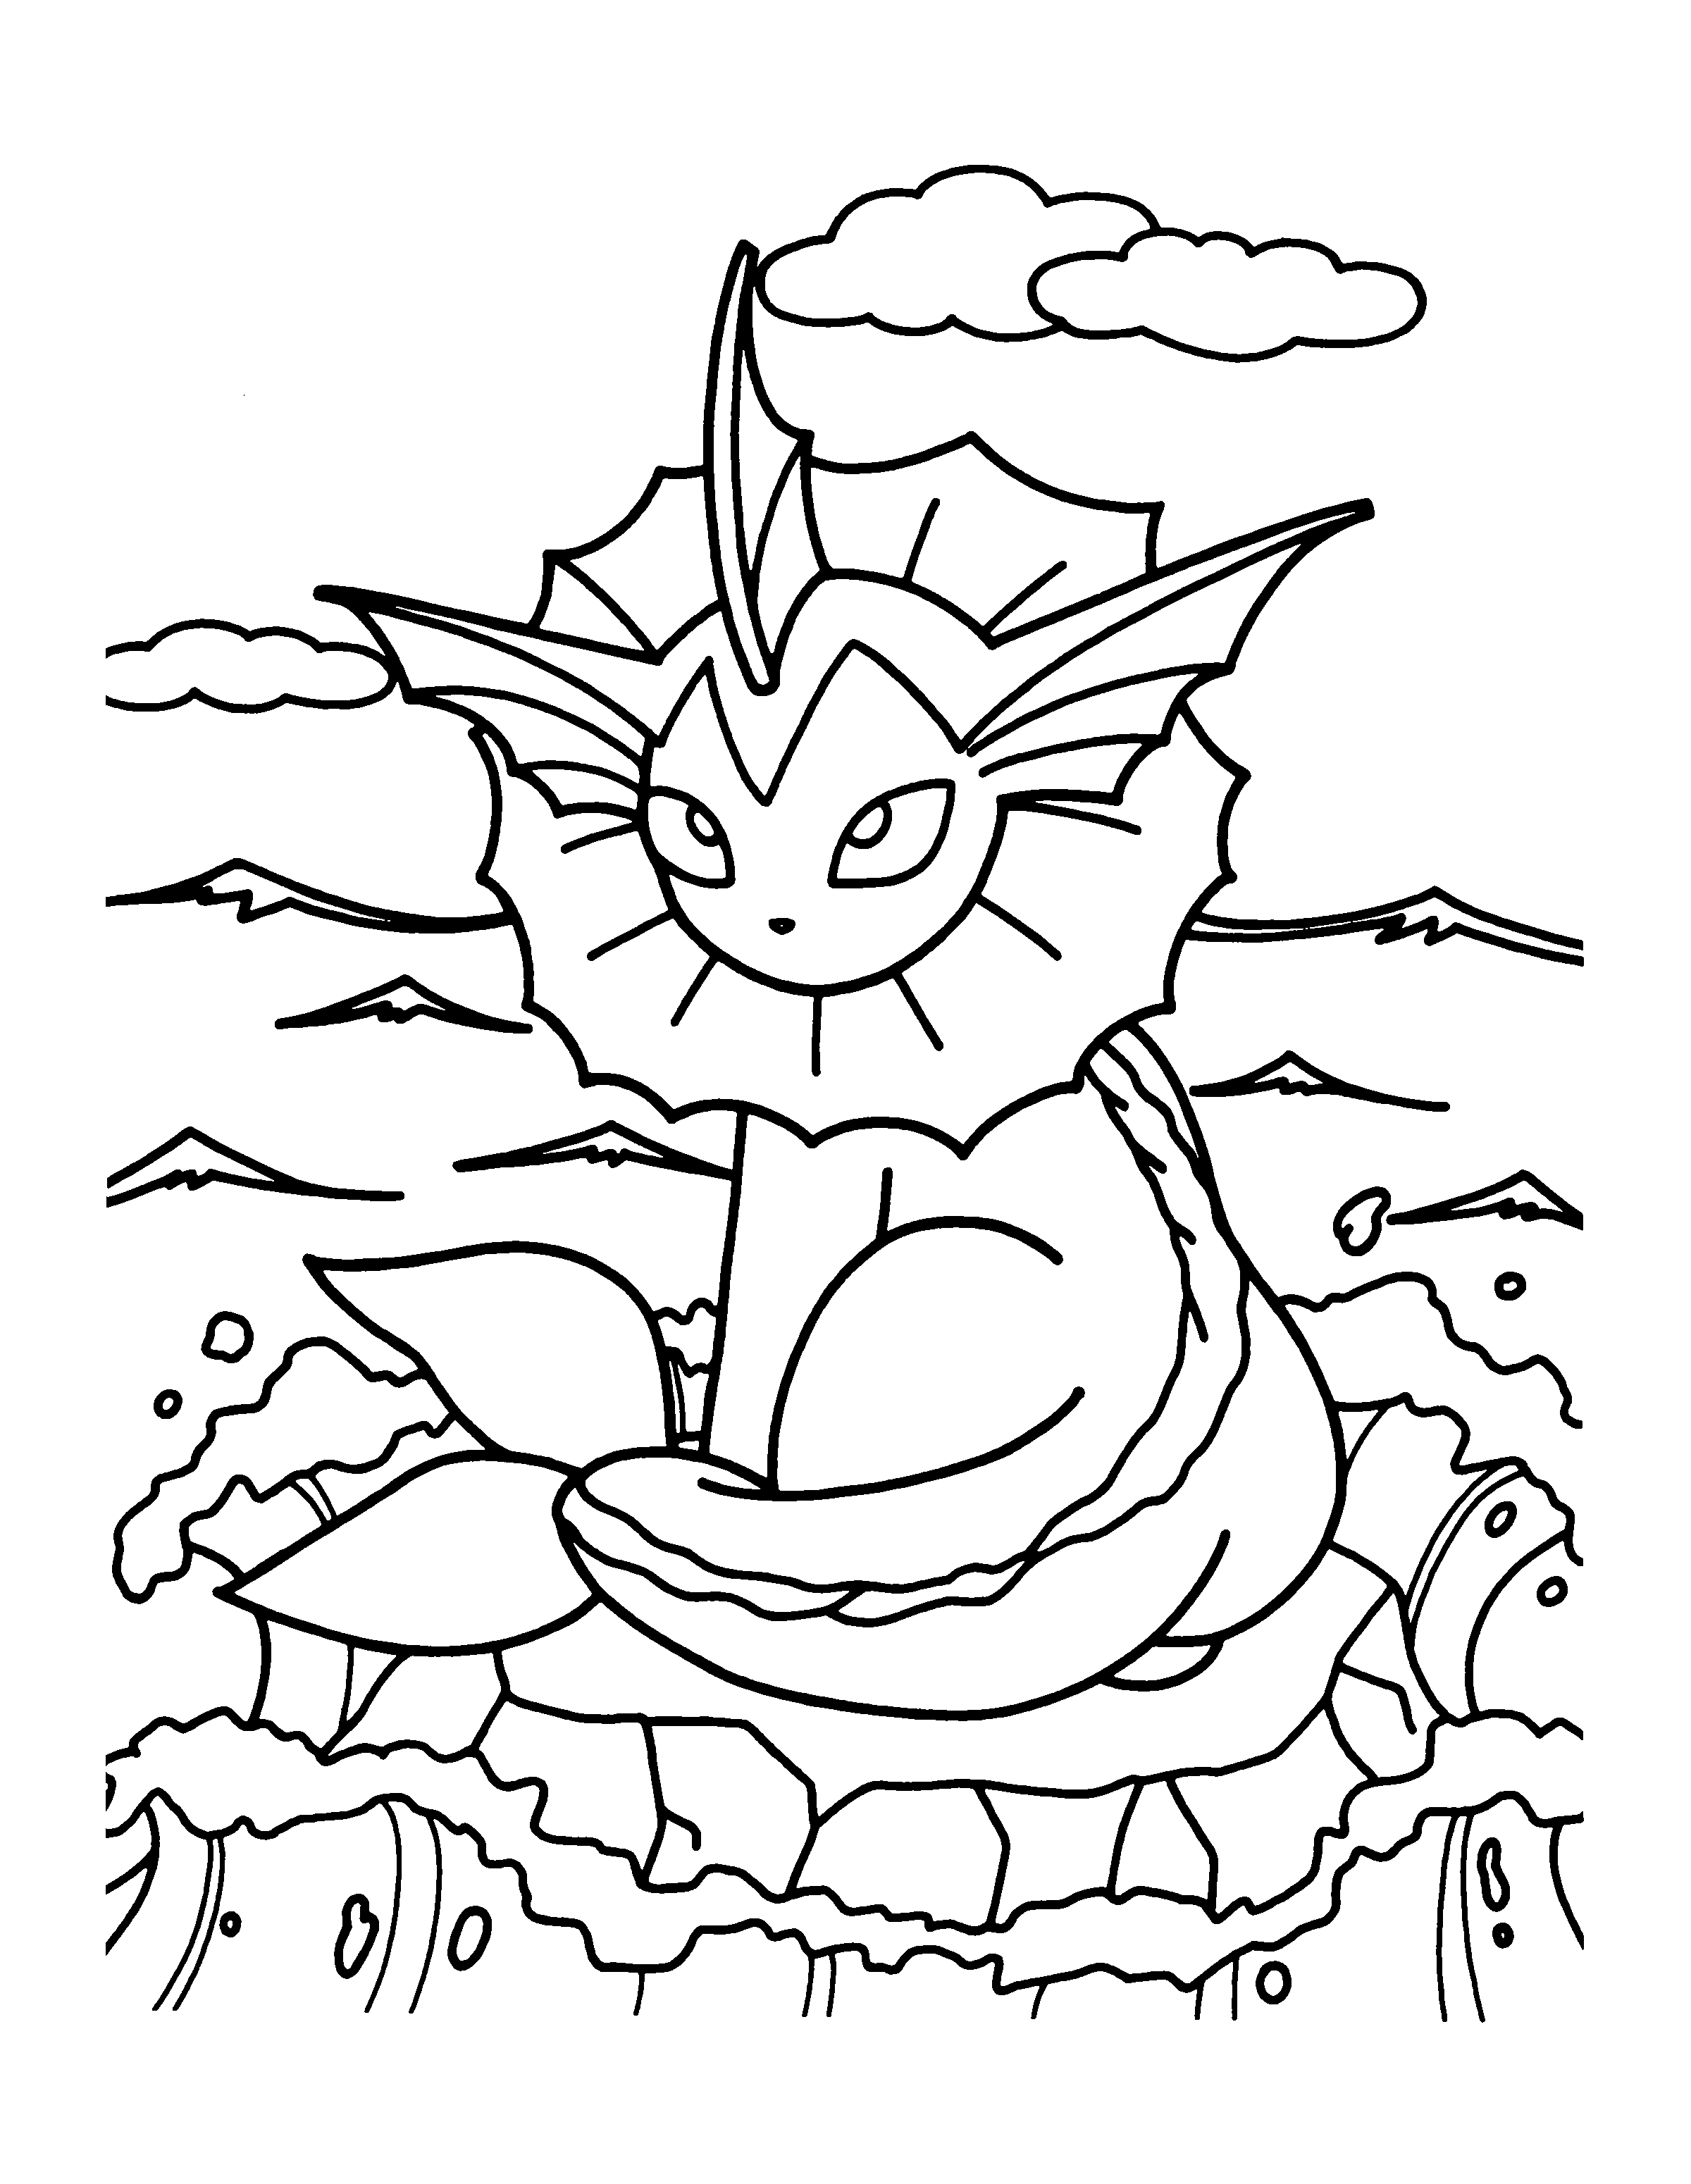 Pokemons 7 For Kids Coloring Page